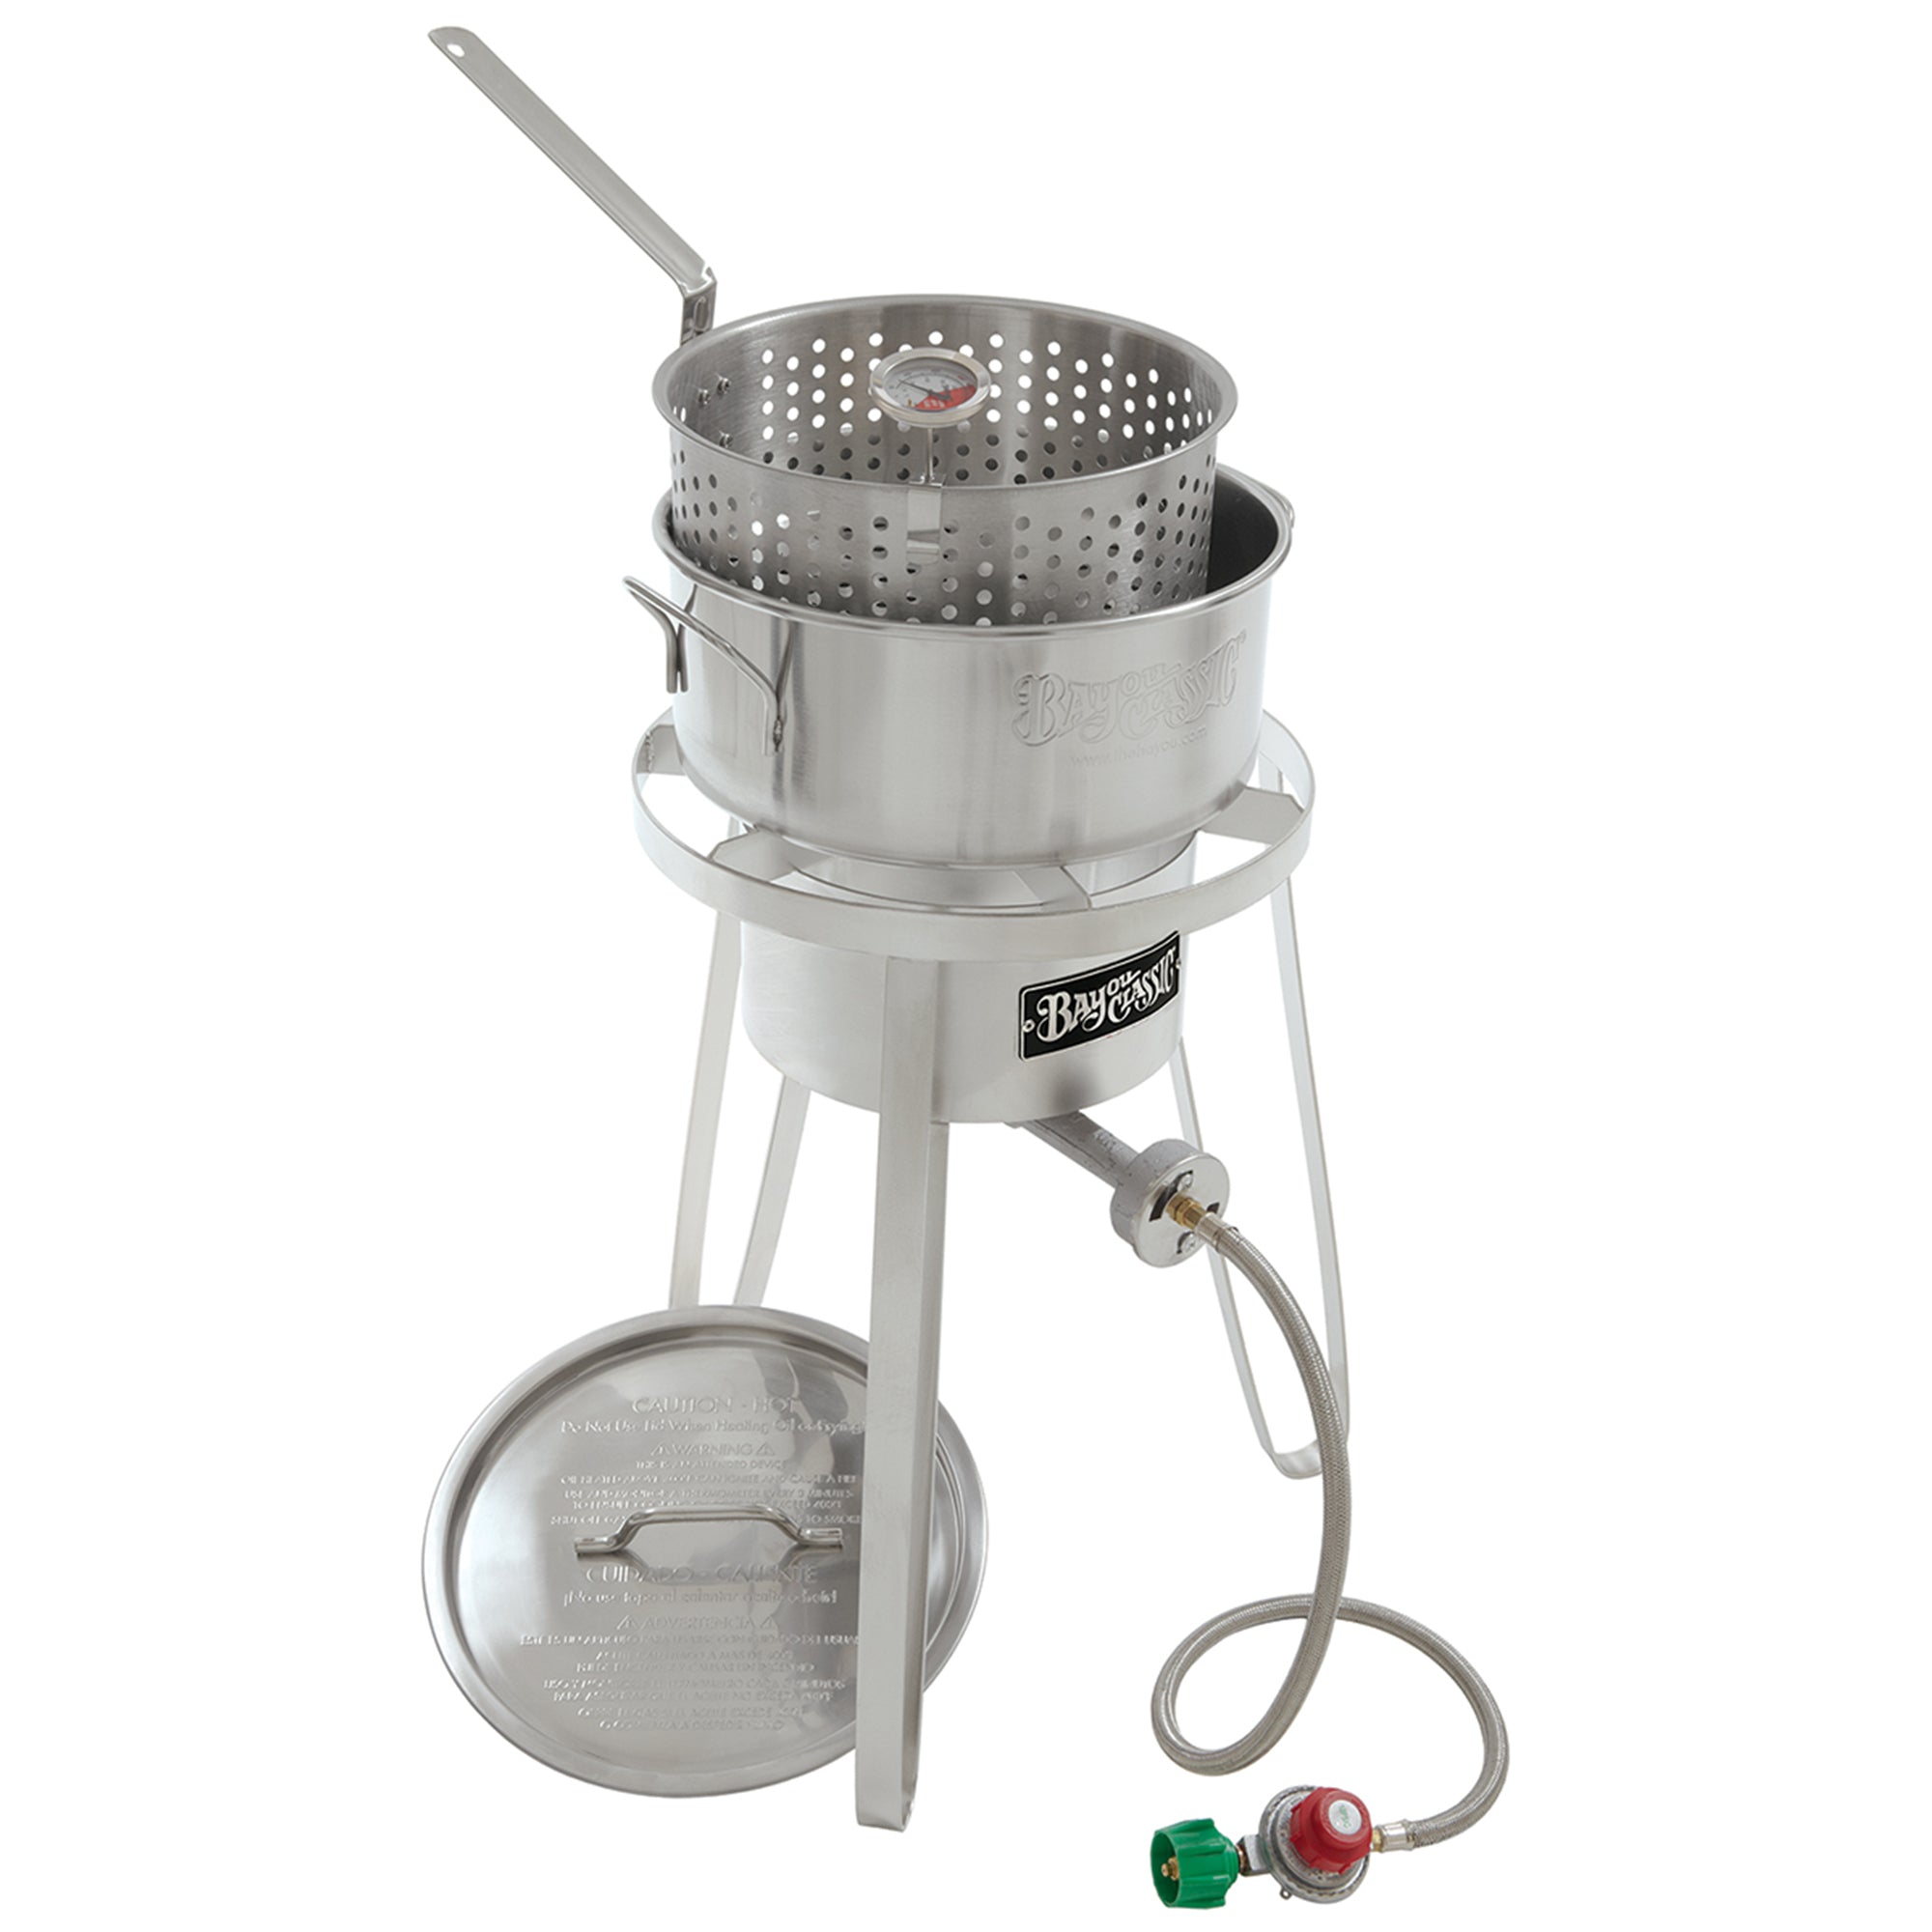 Stainless Fish Cooker, Outdoor Cooker Kits